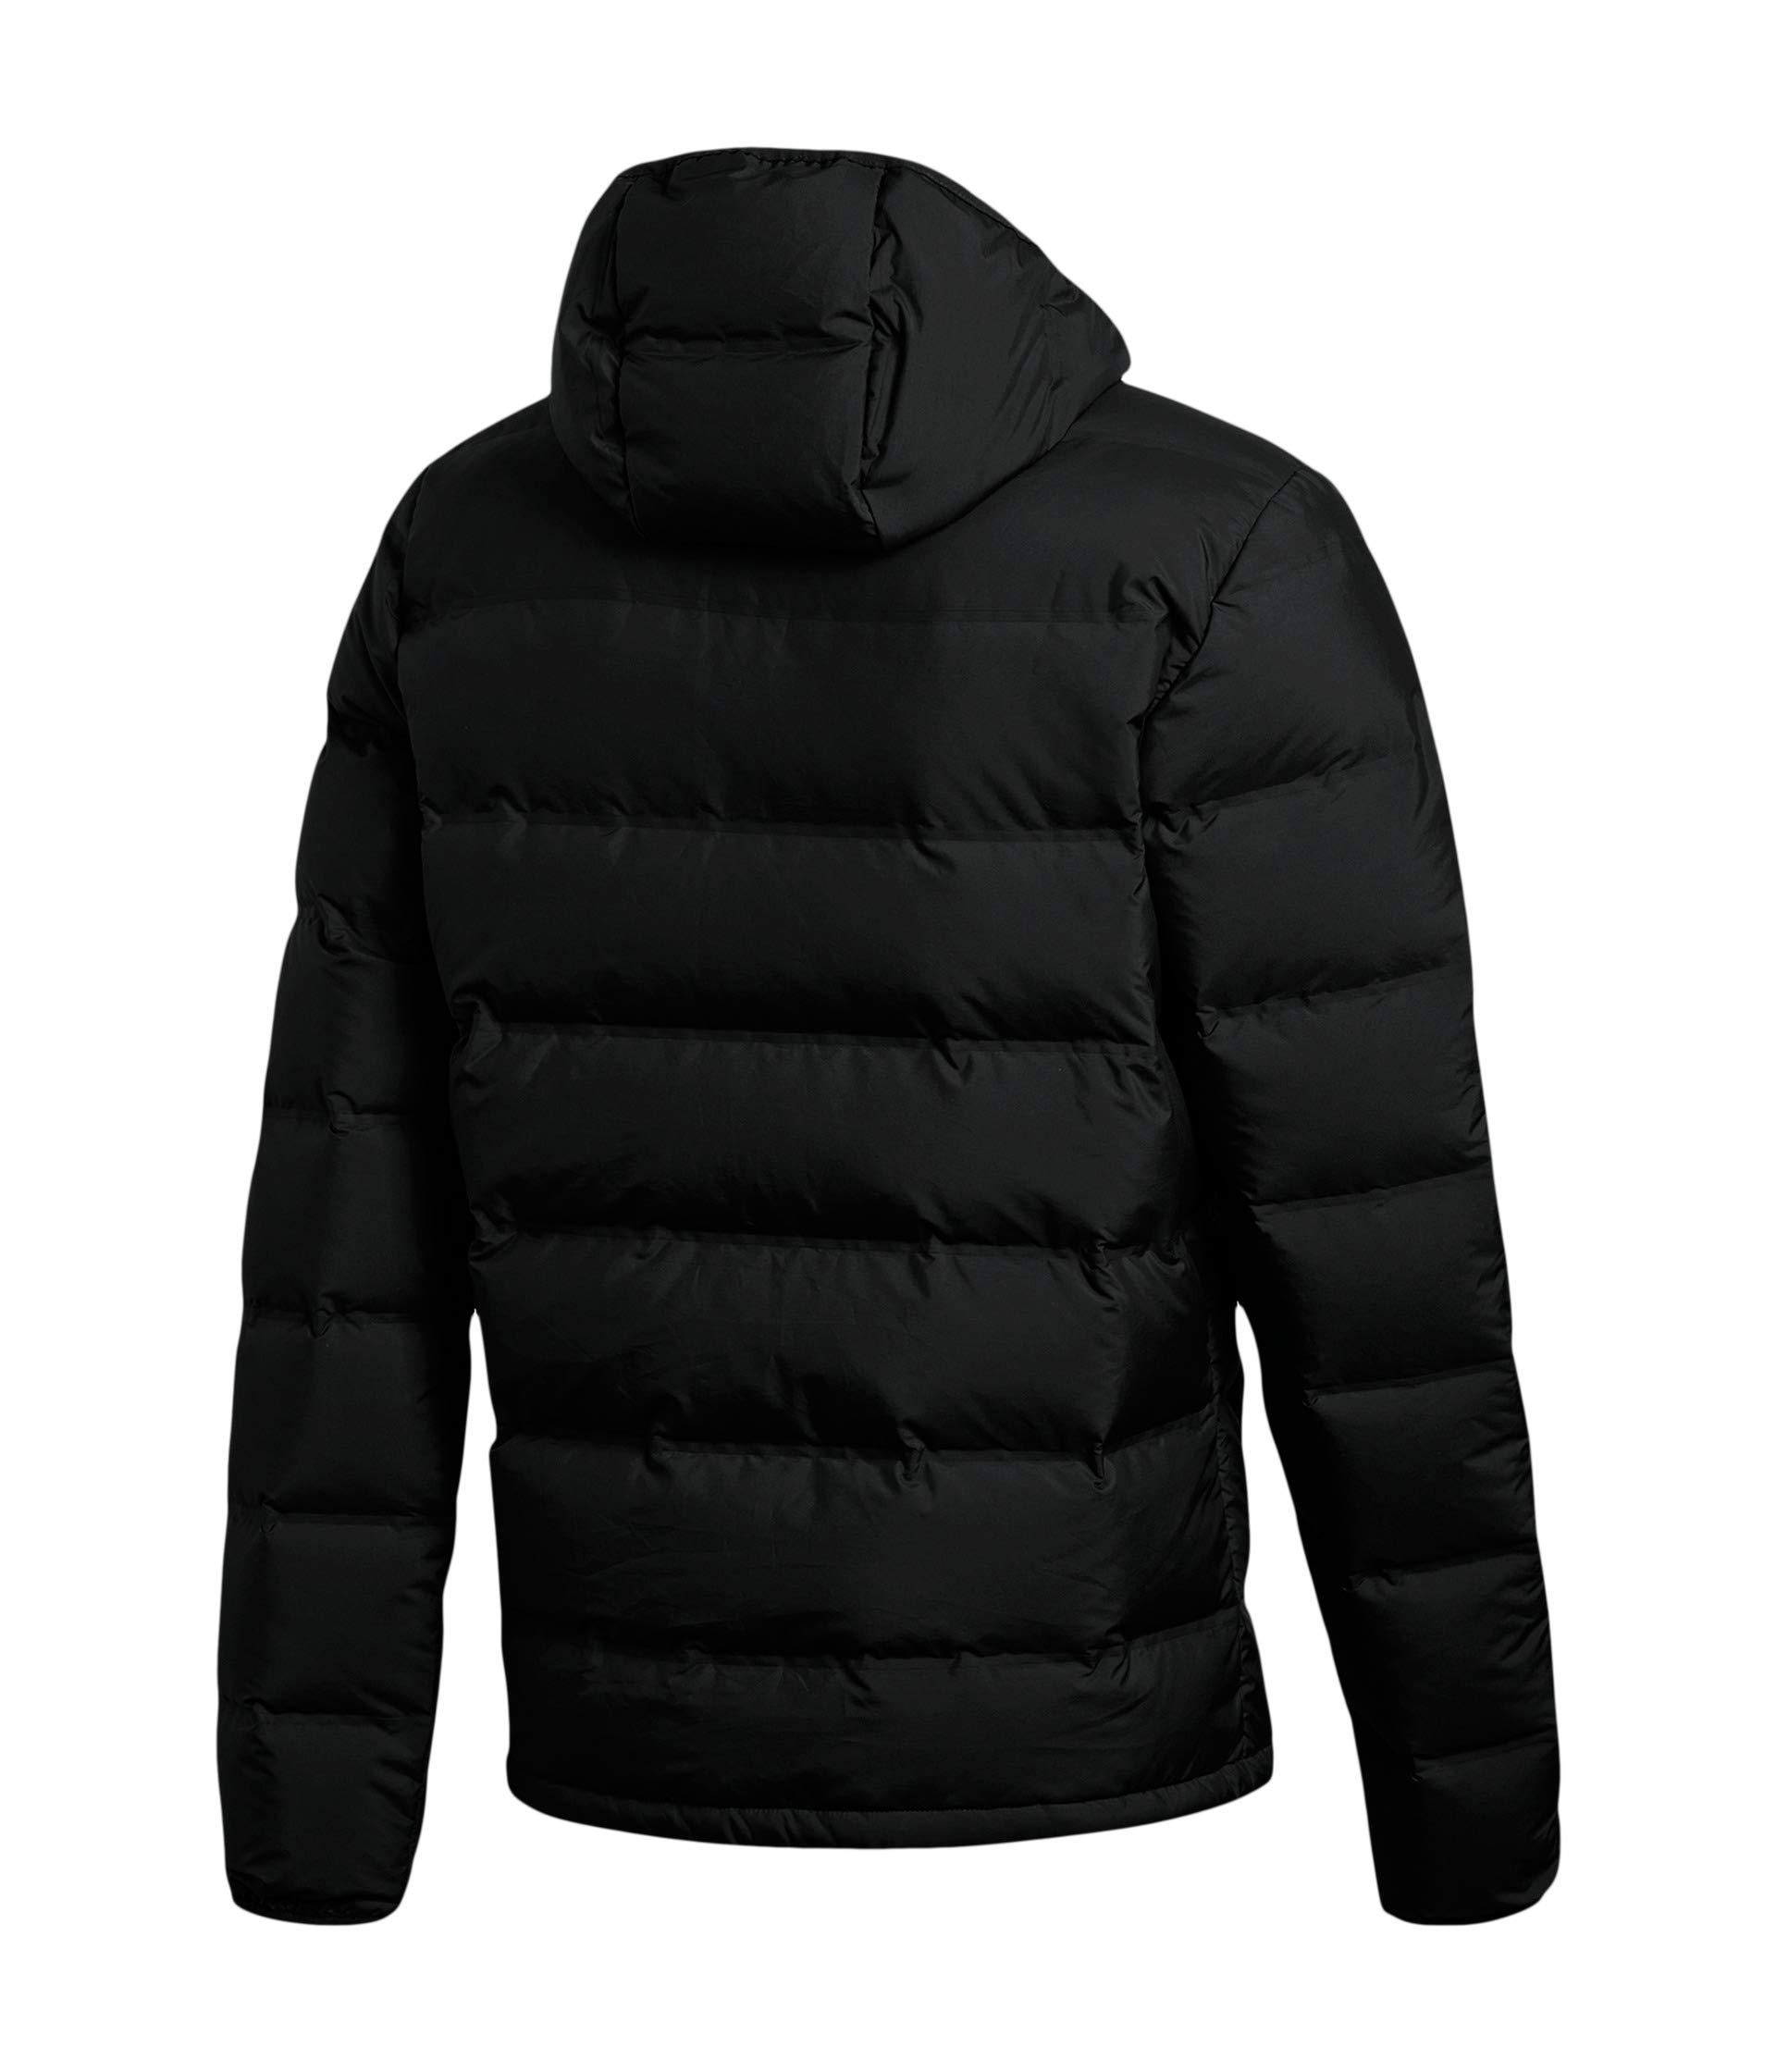 adidas Originals Synthetic Helionic Hooded Jacket in Black for Men - Lyst